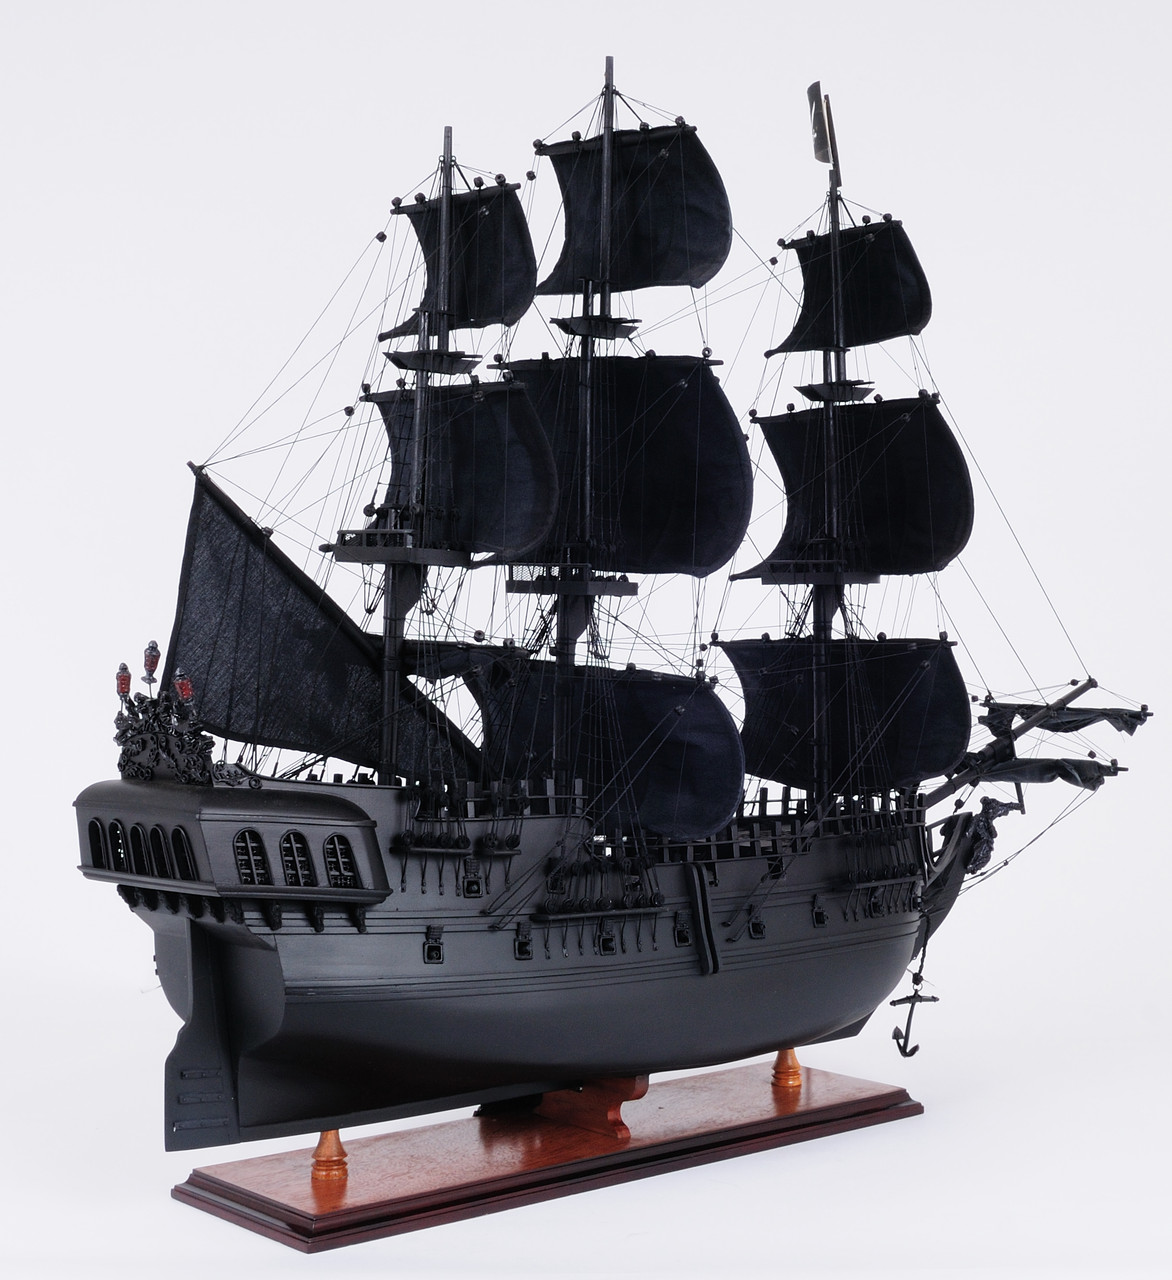 Black Pearl Pirate Model Ship - 29" w/ Table Top Display Case - Optional Personalized Plaque